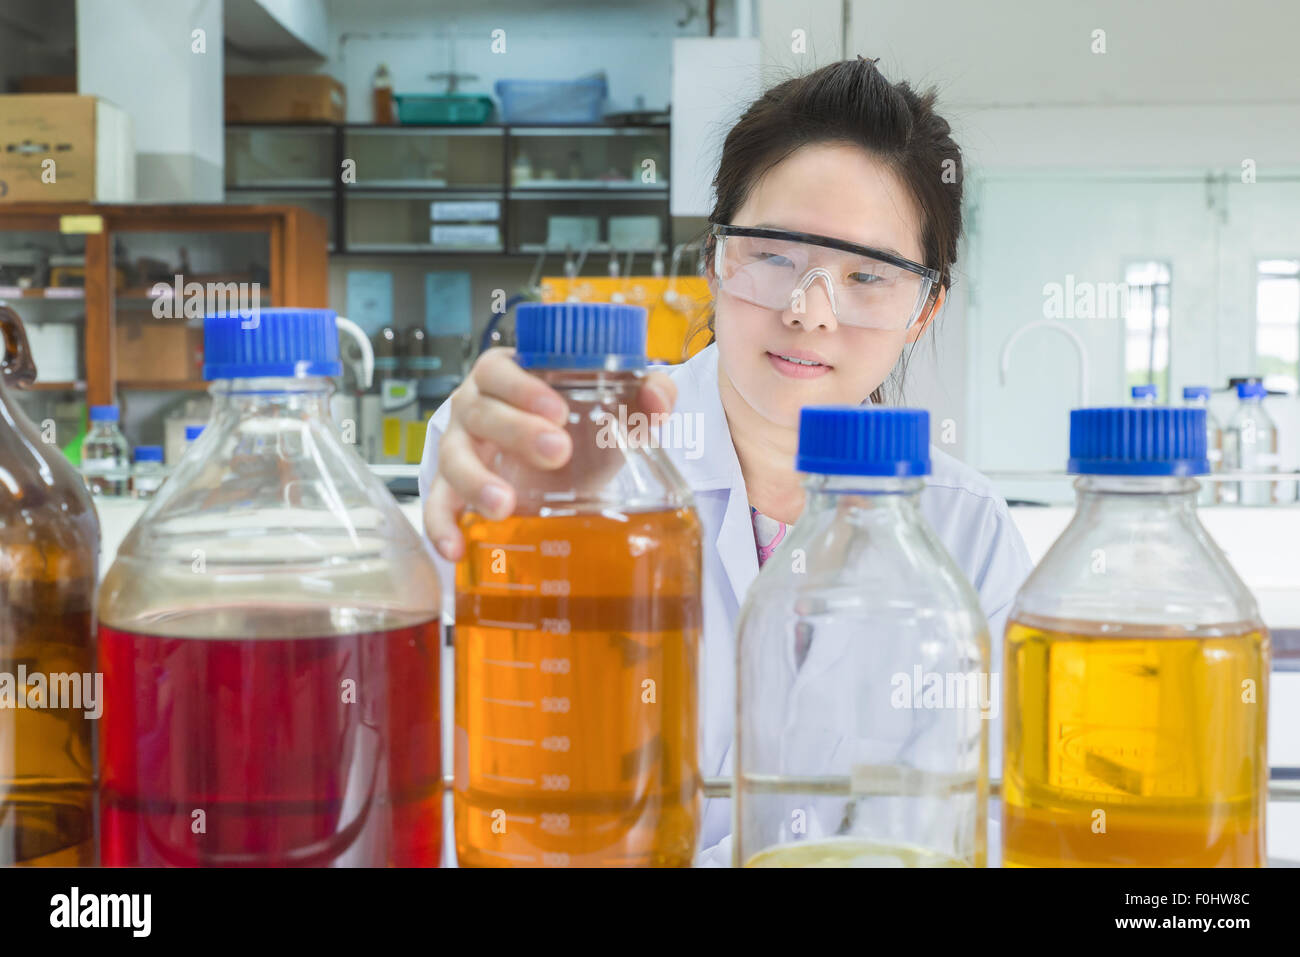 Asian scientist selecting bottle in shelf at laboratory Stock Photo